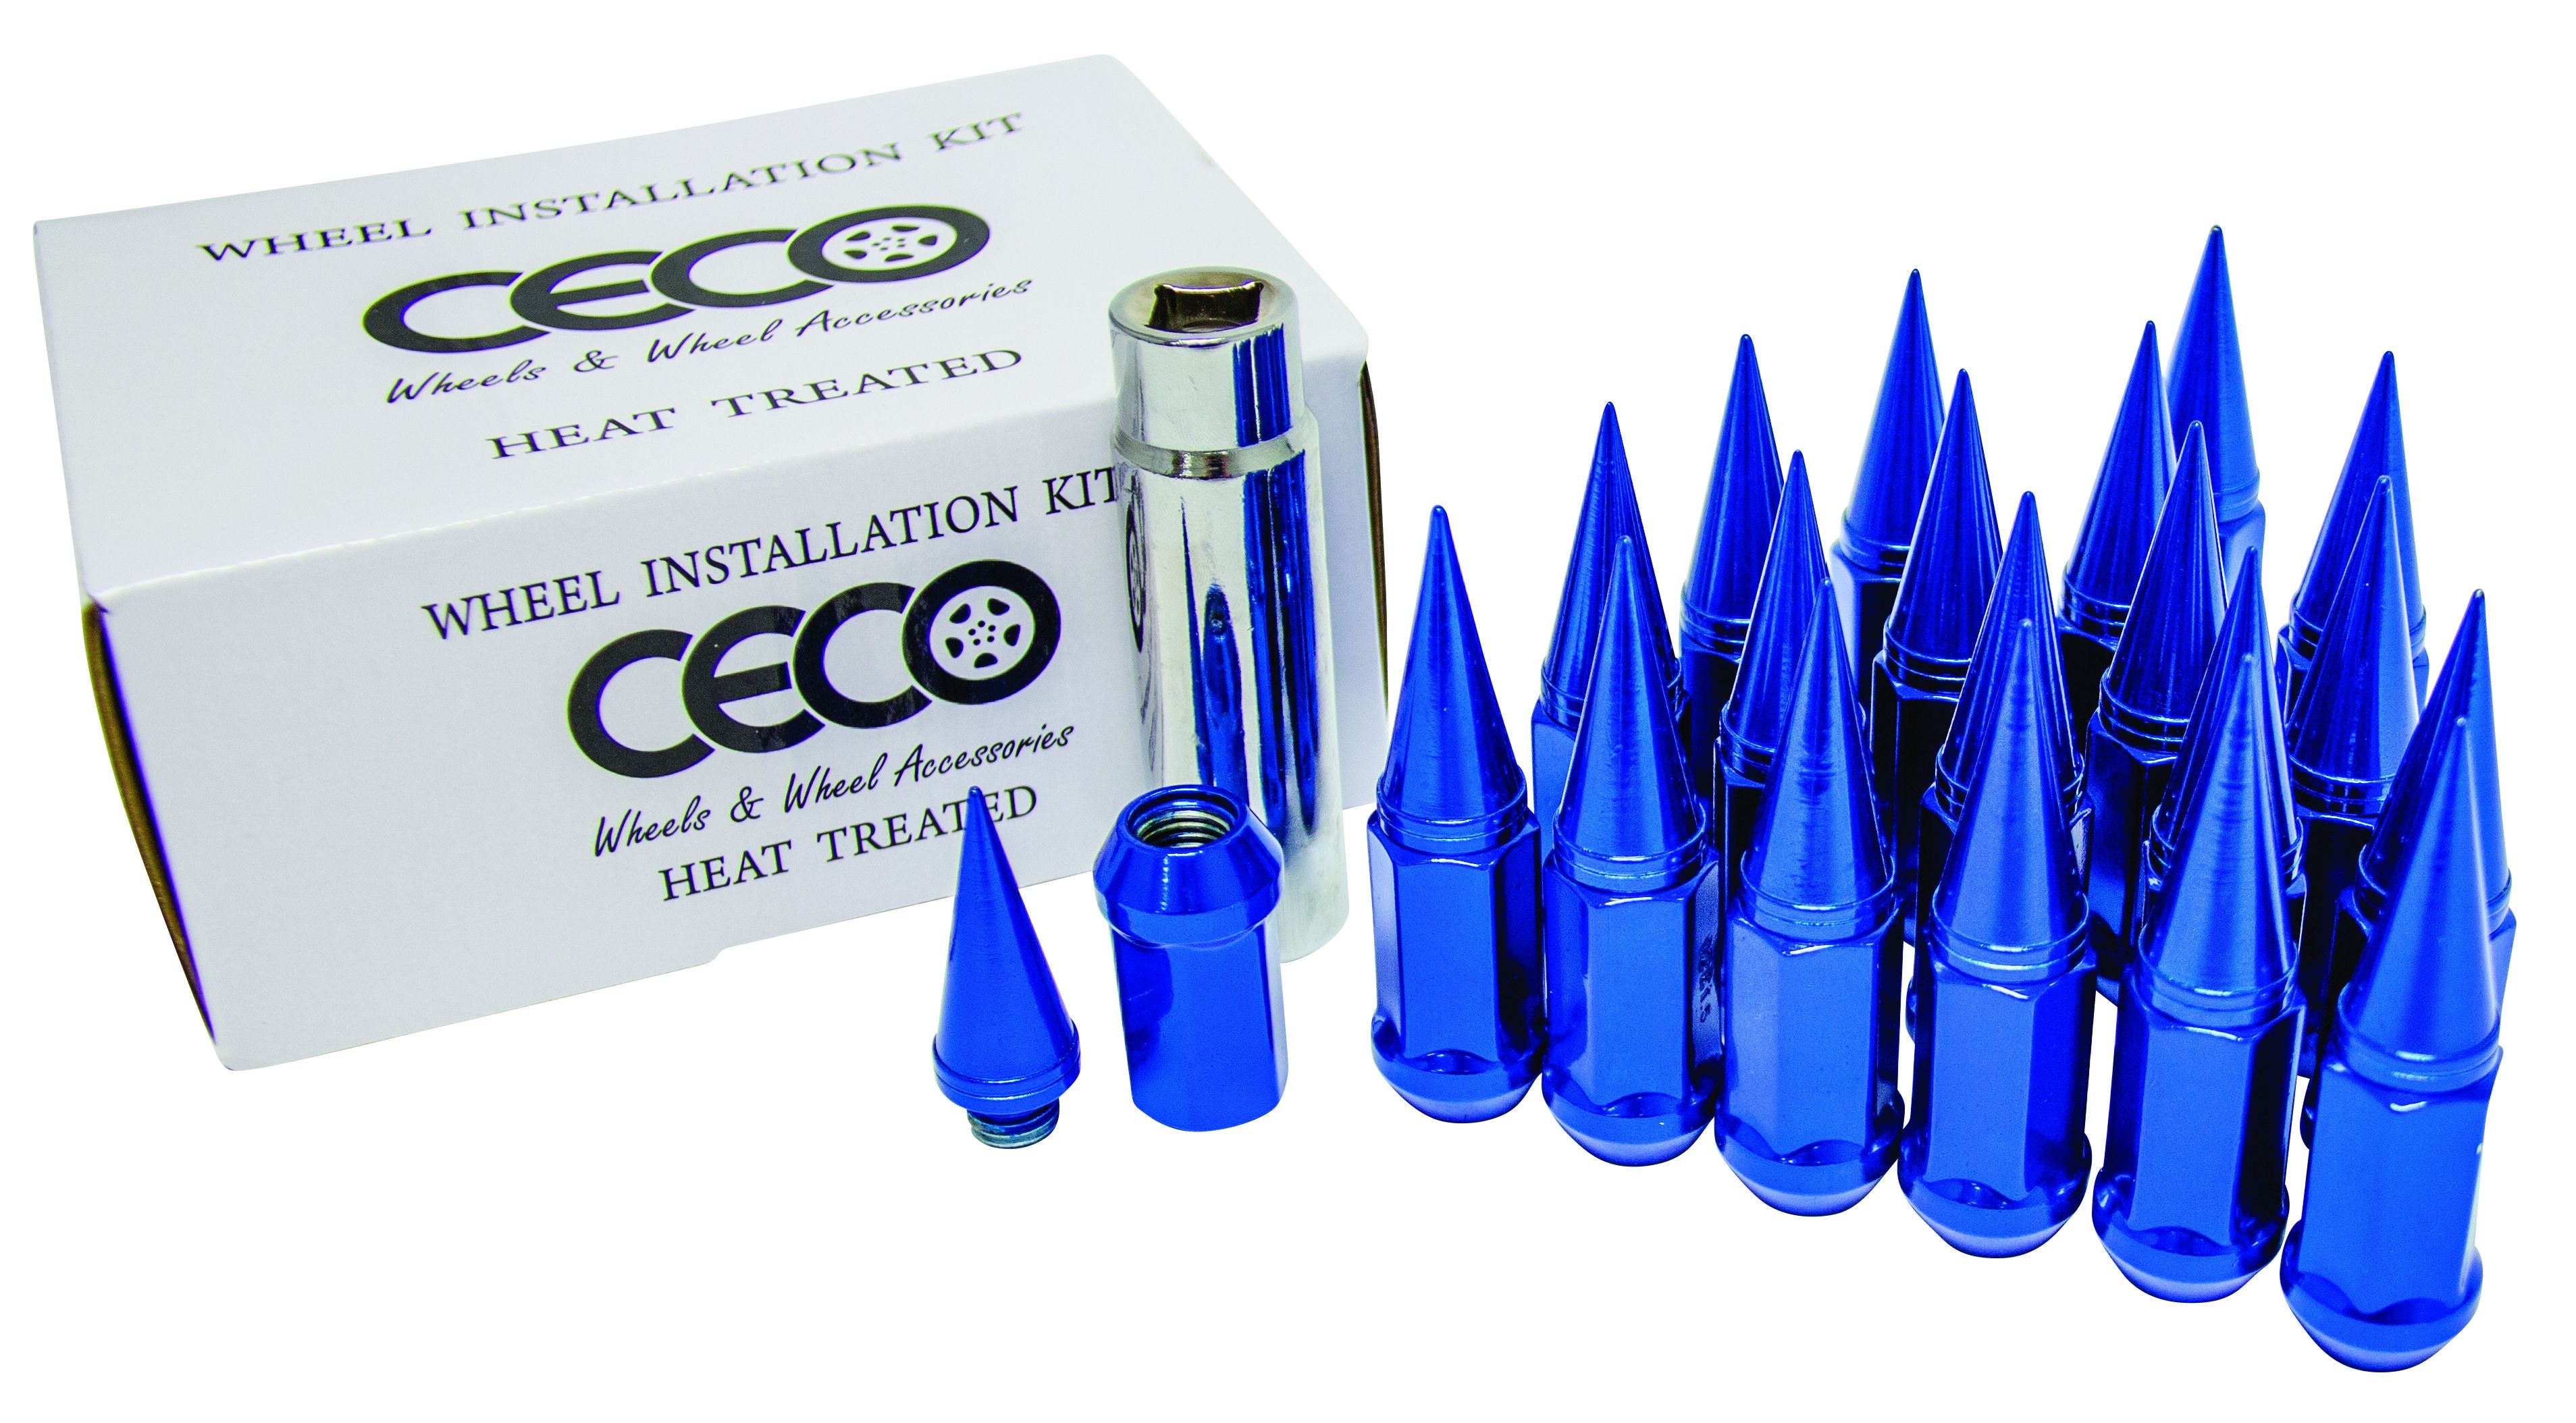 Ceco SPIKE4806-6BL - (24) BLUE SPIKE NUT 2PC W/LOCK 12X1.25 82mm Lenght 19mm Hex